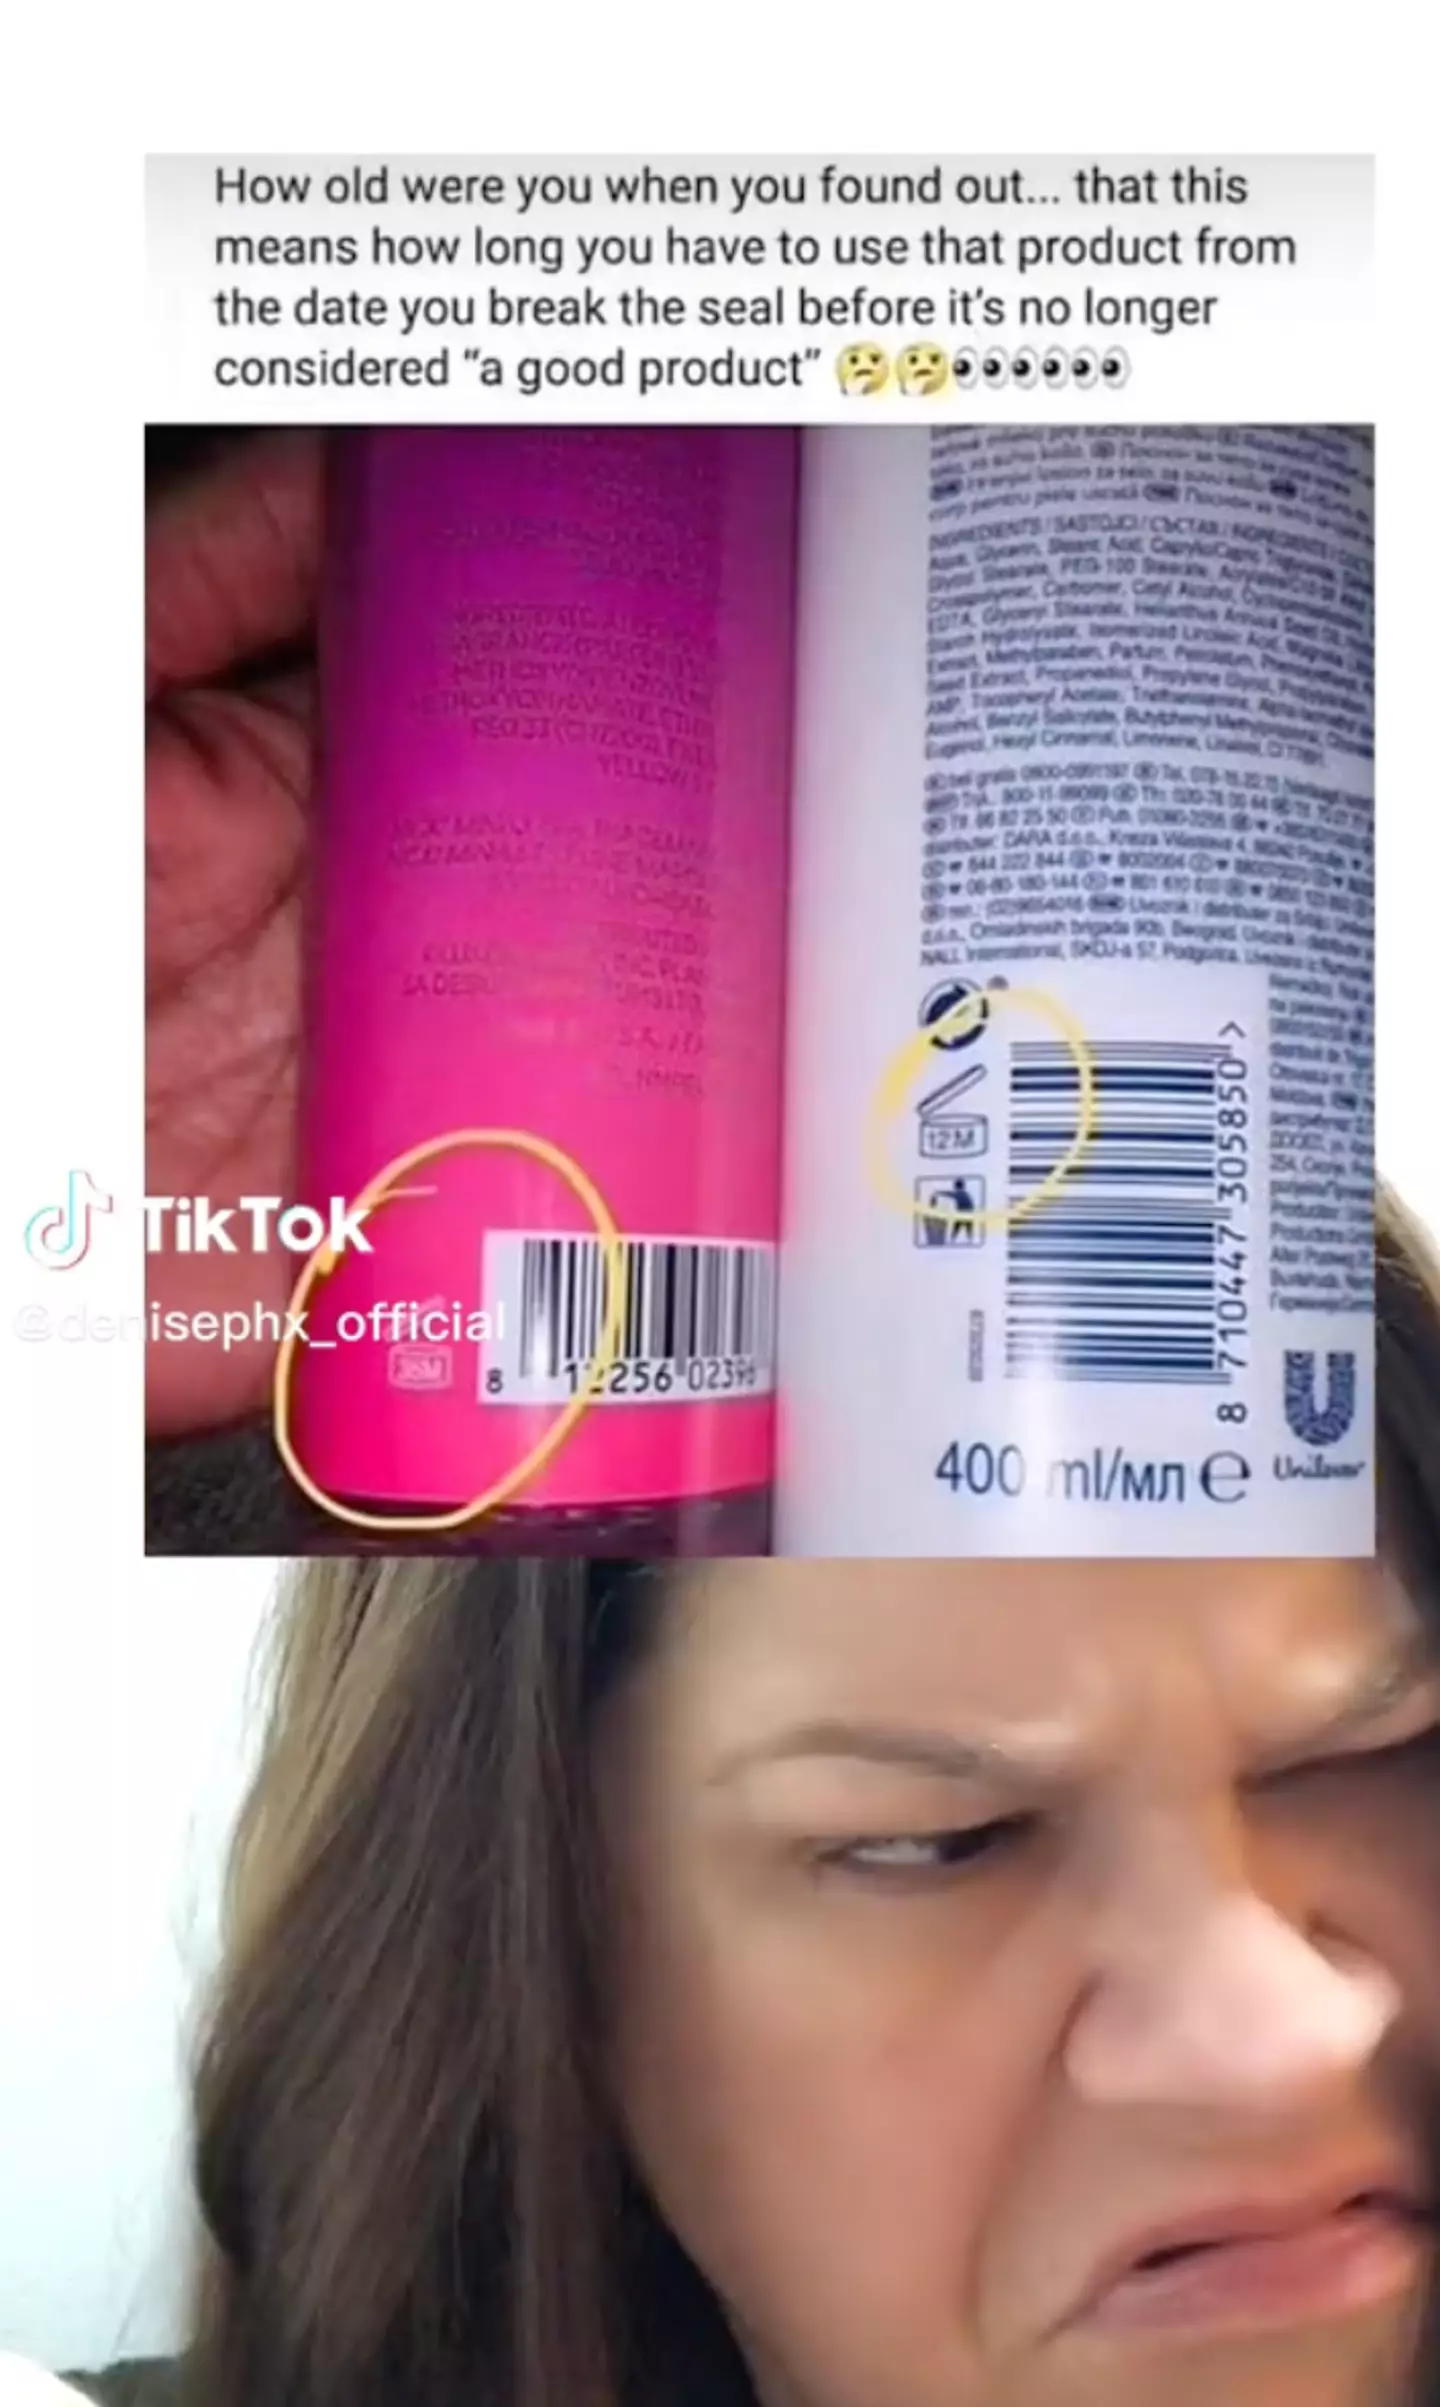 Denise shared a video of a screengrab which featured a photo of a shampoo and conditioner bottle.